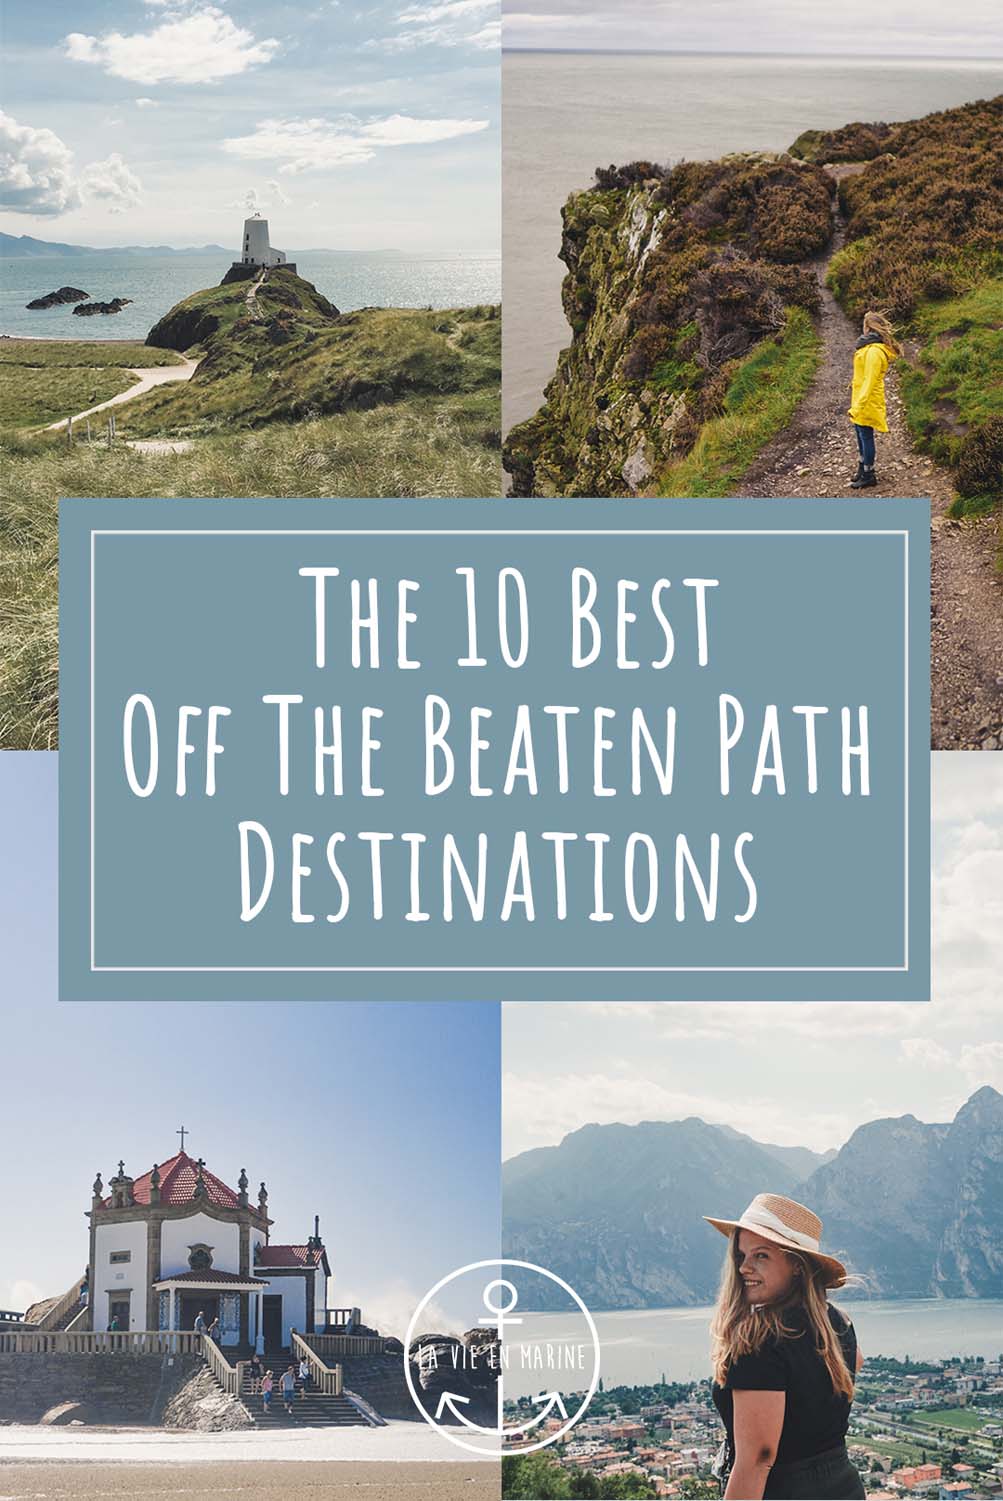 off the beaten path travel guide